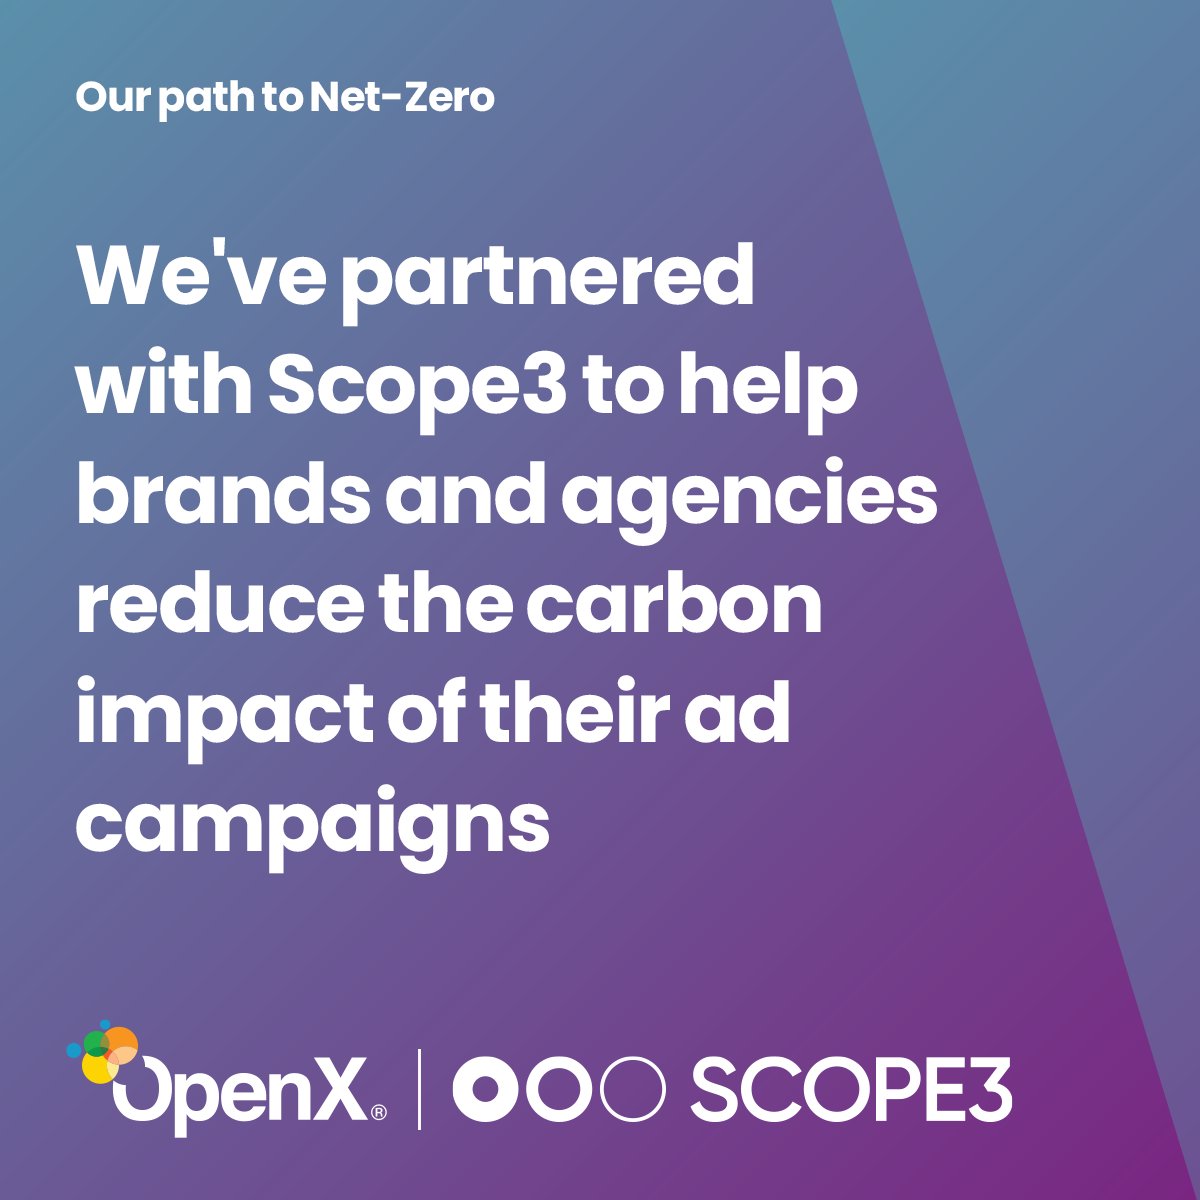 Partnering with Scope3 means we can offer Green Xchange Packages (GXPs) that leverage their ability to measure/compensate for carbon emissions of brand advertising campaigns. Full press release here: bit.ly/3N4mtHB #netzero #sustainability #greenexchange